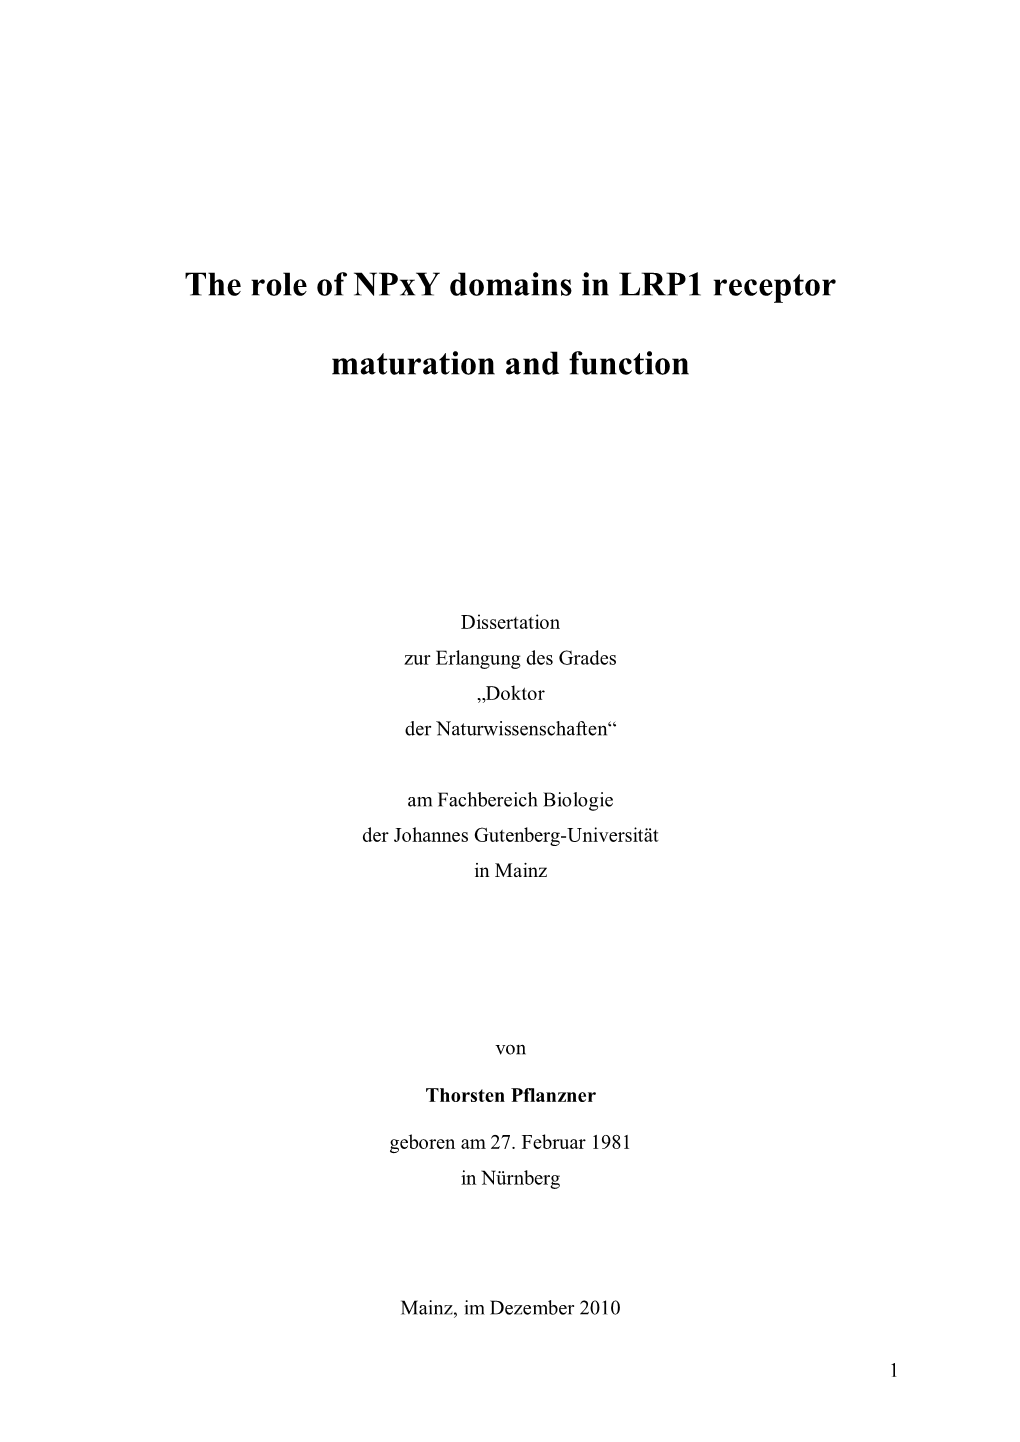 The Role of Npxy Domains in LRP1 Receptor Maturation and Function